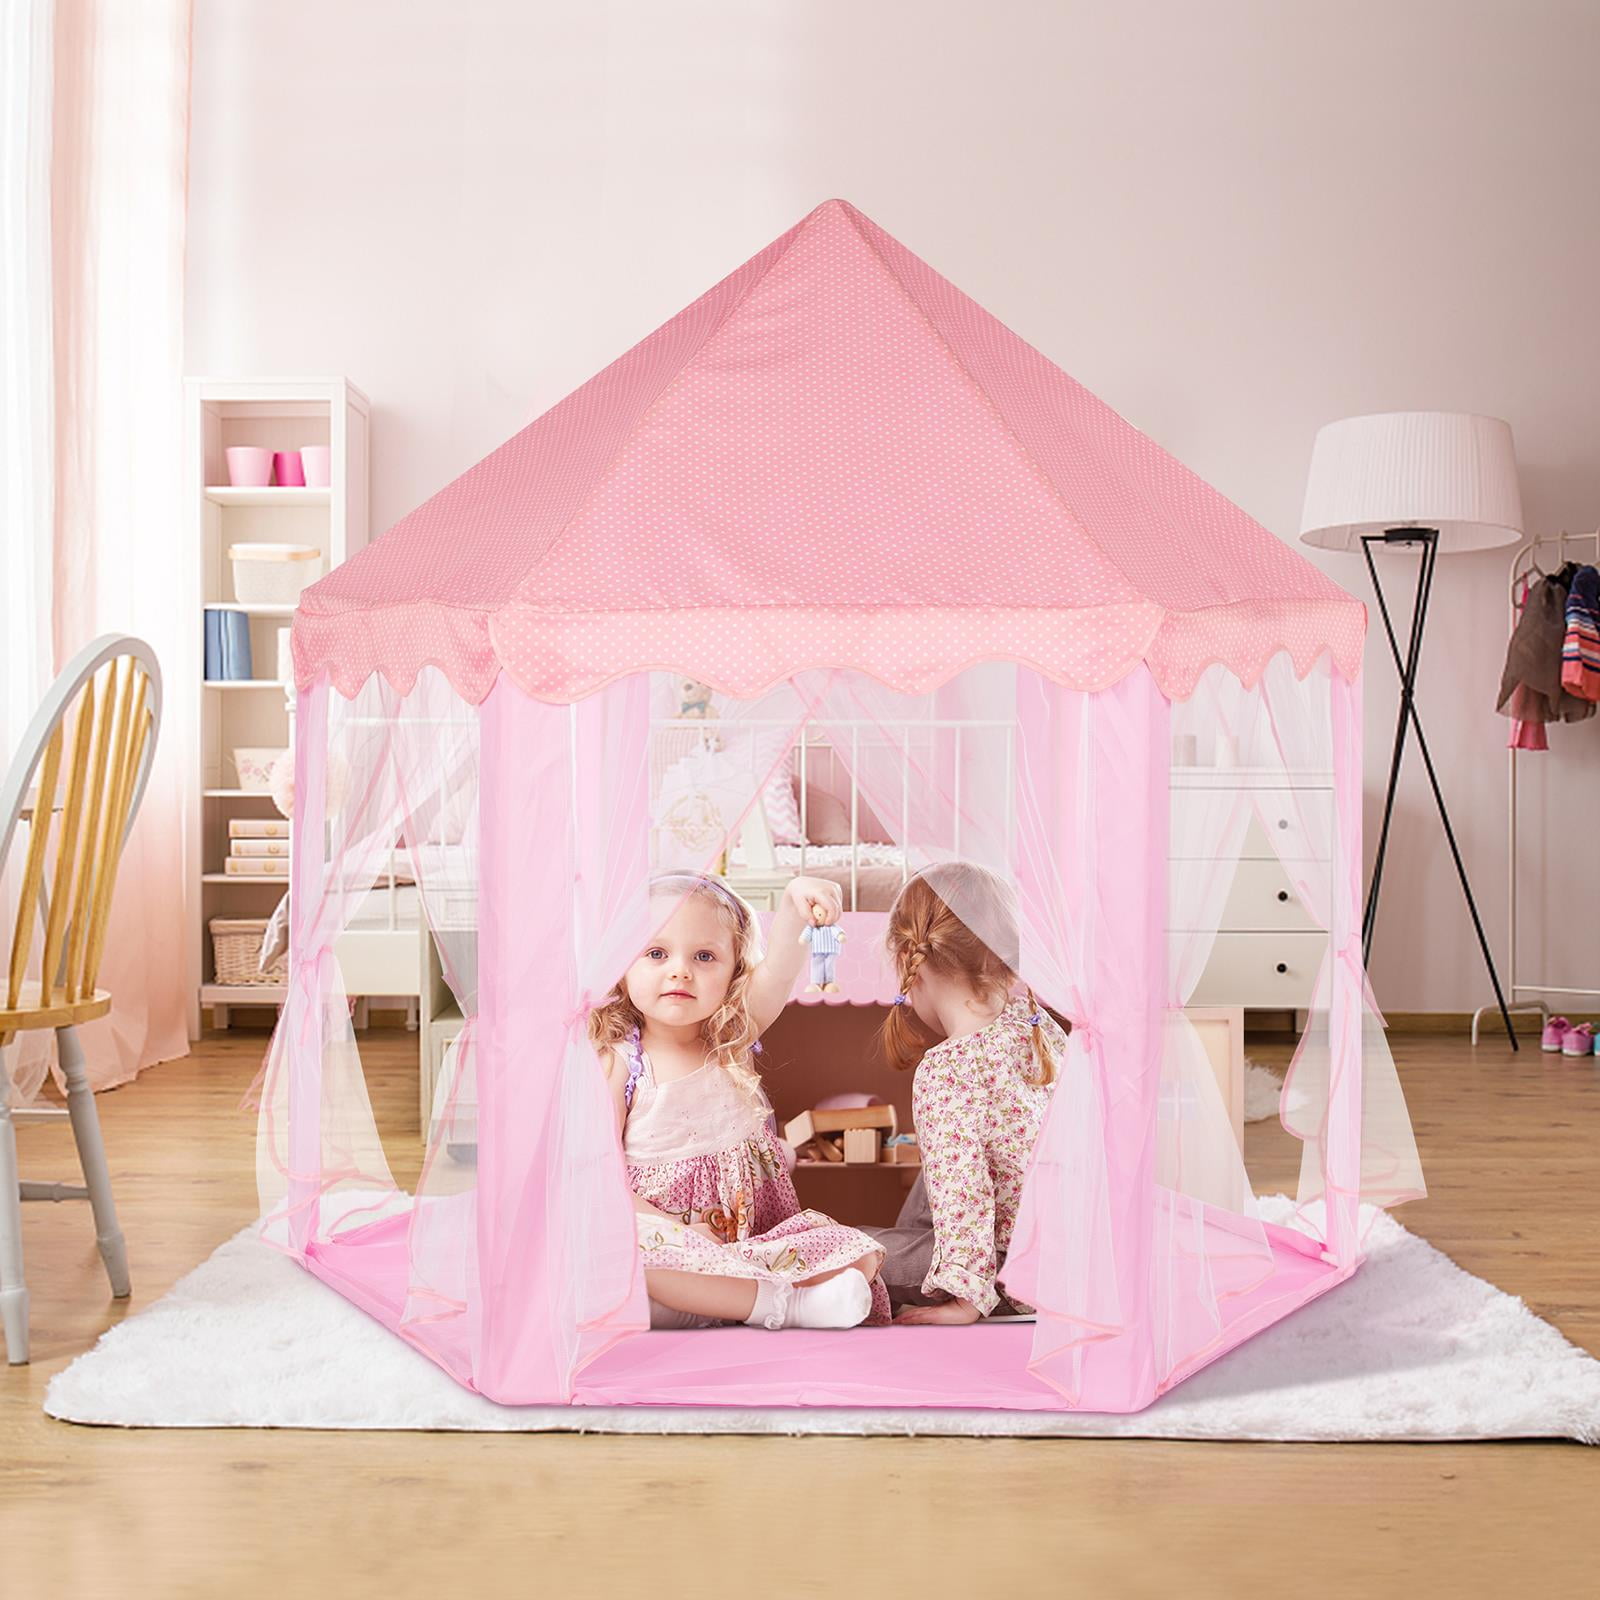 Princess Castle Play House Large Indoor Outdoor Kids Play Pop Up Tent Girls Pink 